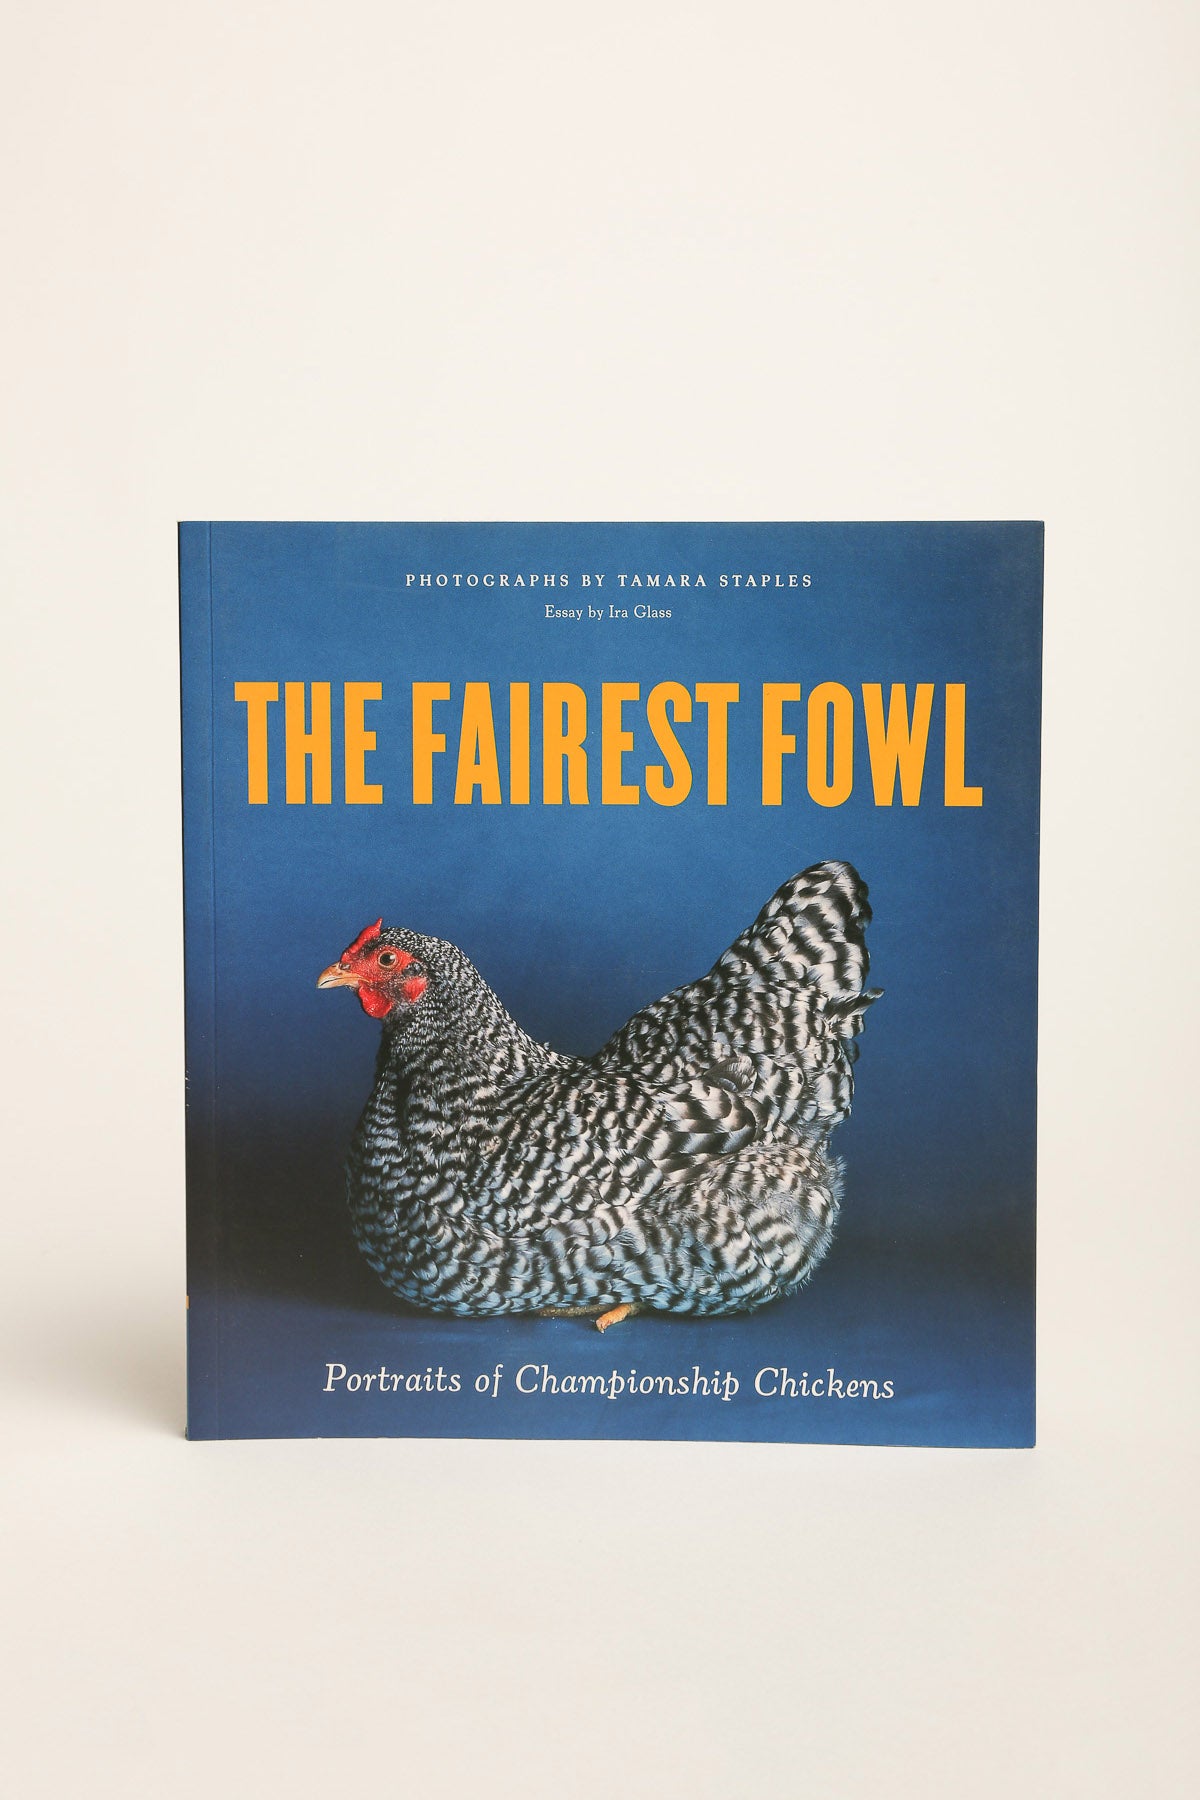 CHRONICLE | THE FAIREST FOWL: PORTRAITS OF CHAMPIONSHIP CHICKENS